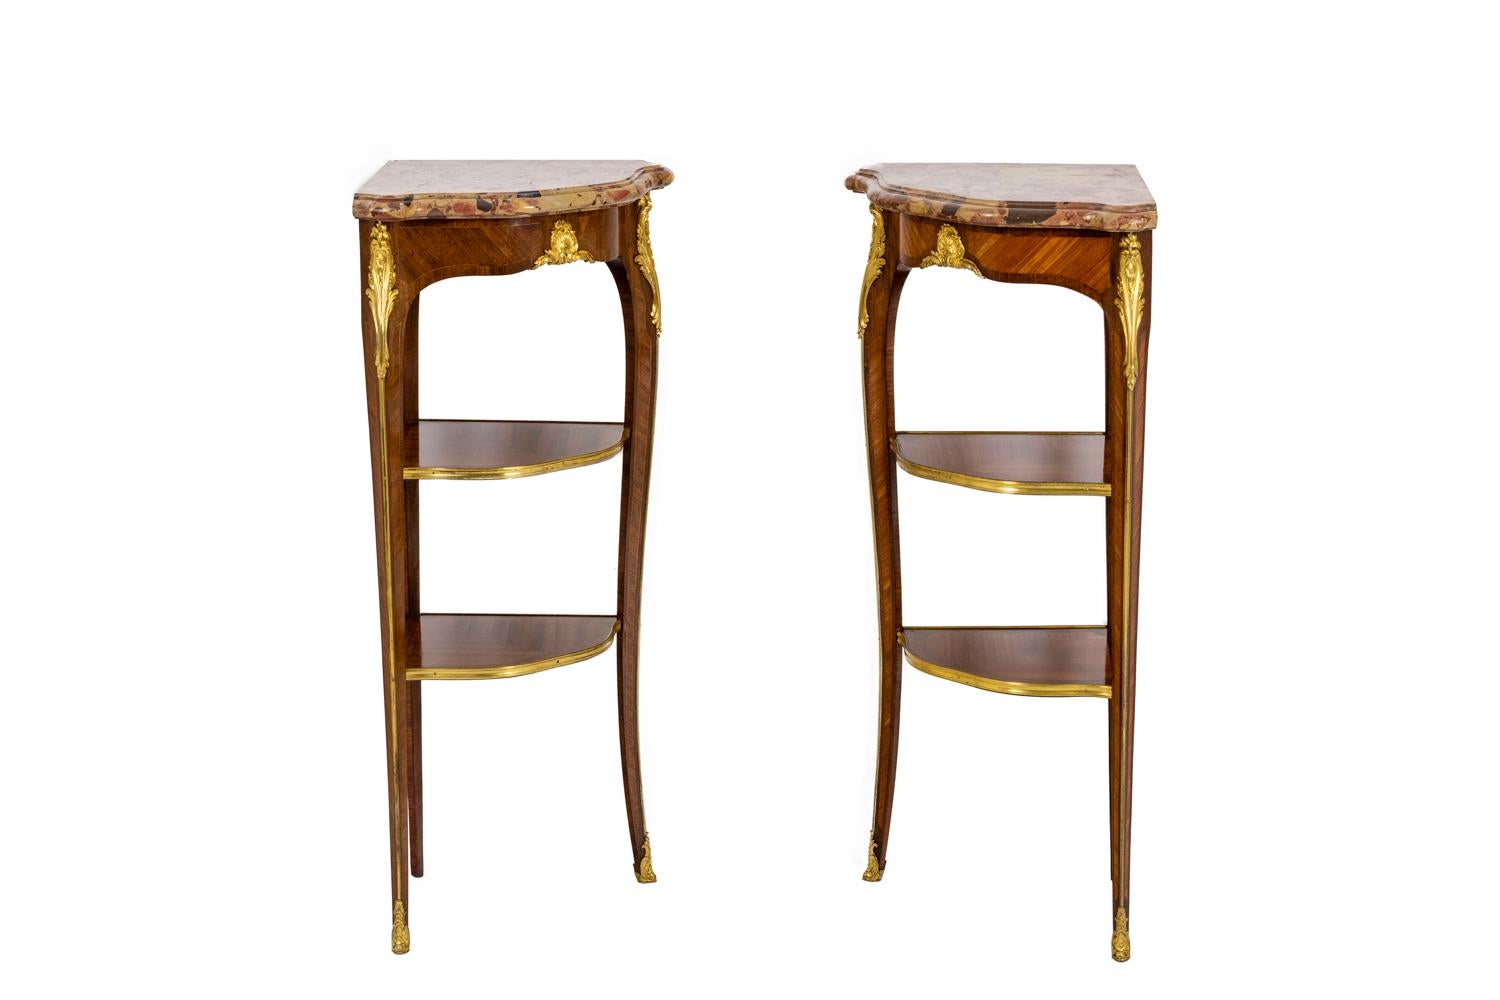 Germain-Maximilien Durand, stamp. 

Pair of rosewood-veneered corner consoles, stamped under the molded Aleppo breccia marble. Veneer in curling wood, rosewood and violet wood. Curved feet joined by two crotch shelves. Gilt bronze trim adorned